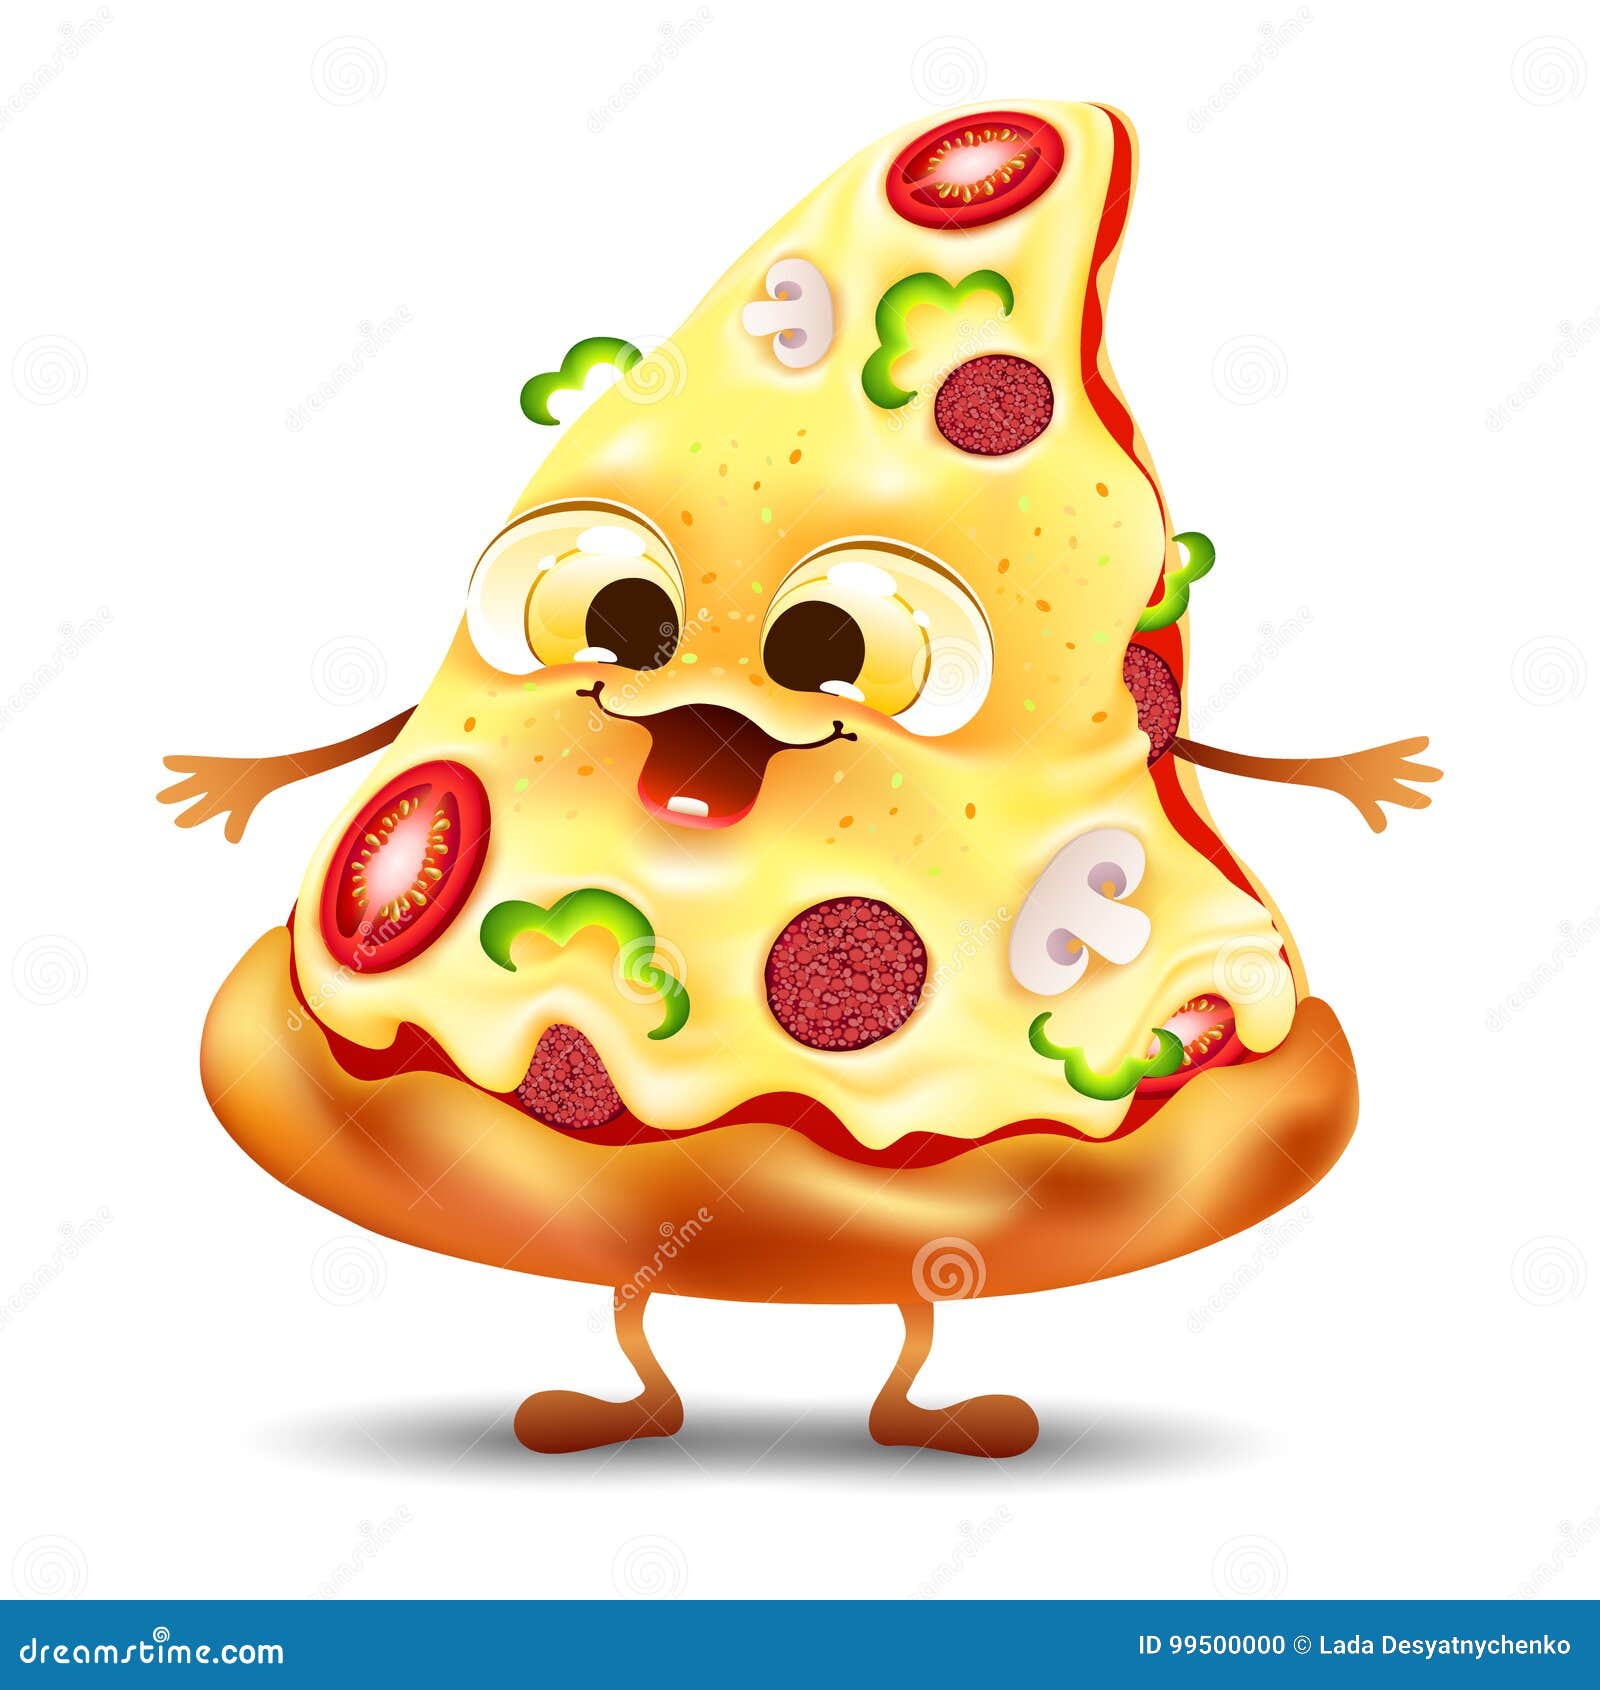 Funny Yummy Pizza Slice Character Stock Vector   Illustration of ...